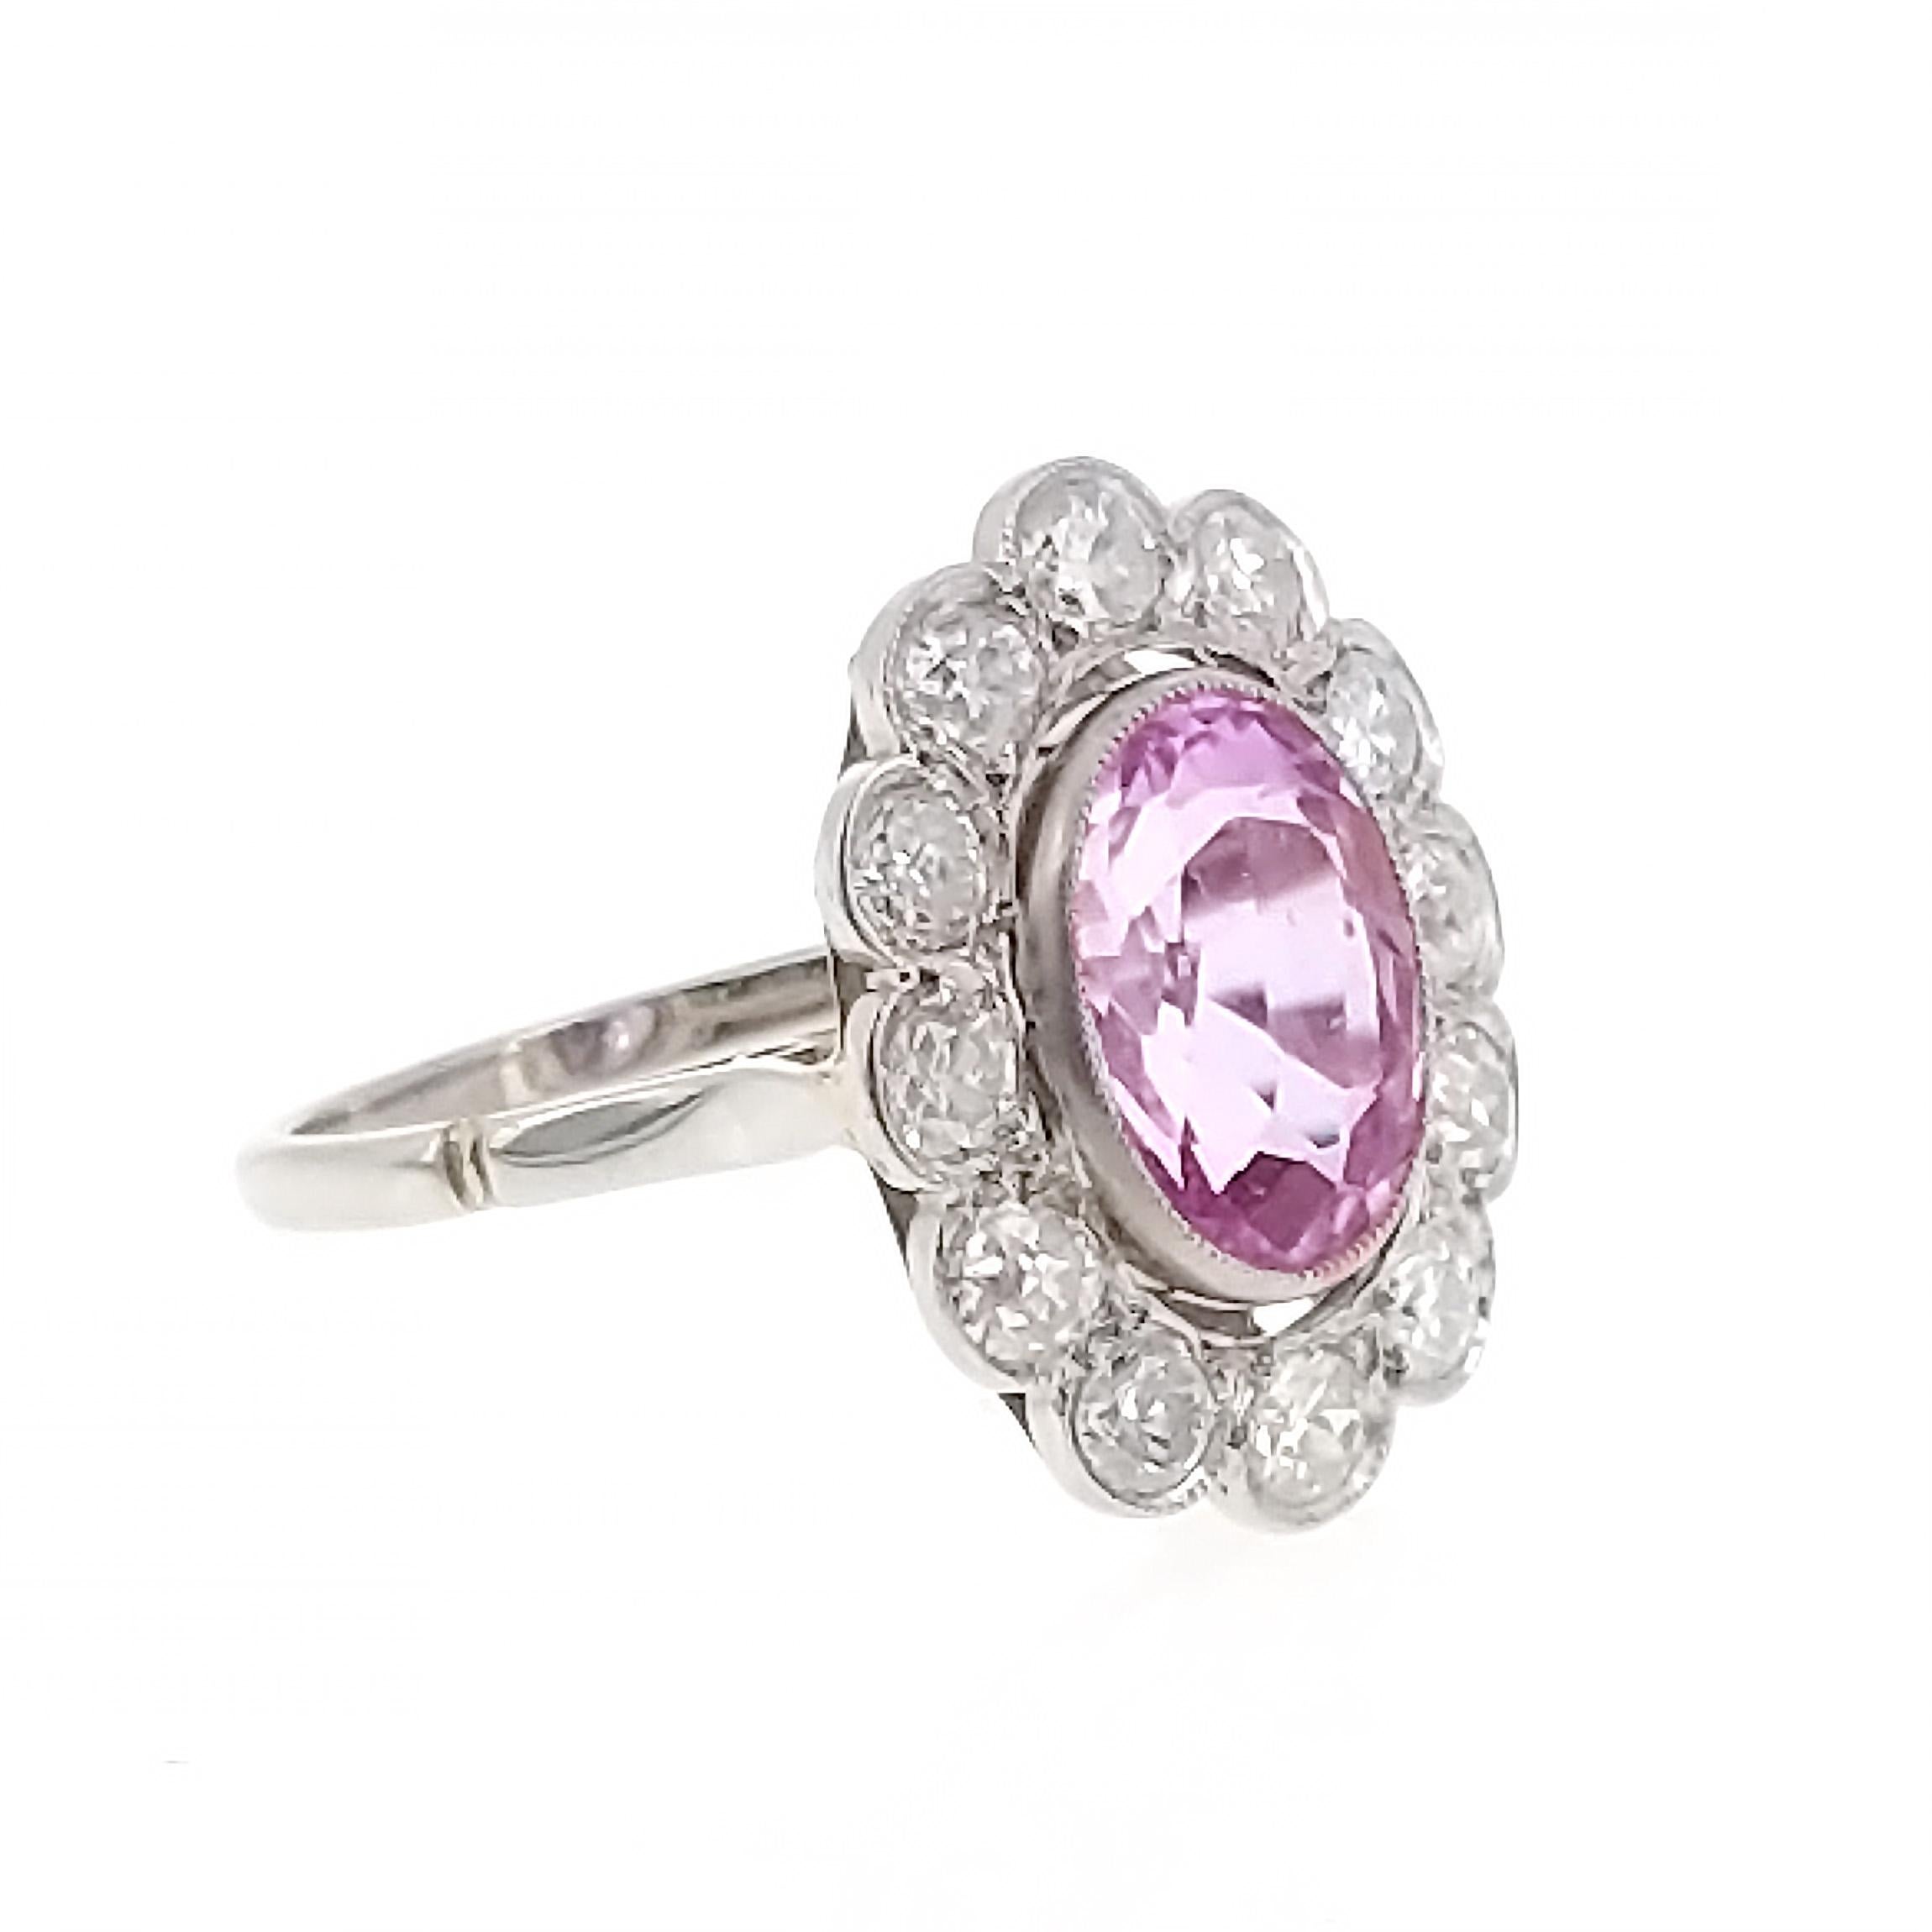 An elegant ring centering upon an oval-shaped pink sapphire of approximately 4.40 carats within a cluster of chunky circular- and old European-cut diamonds for circa 1.50 carats in total, mounted in platinum and 18k gold, with French assay marks,